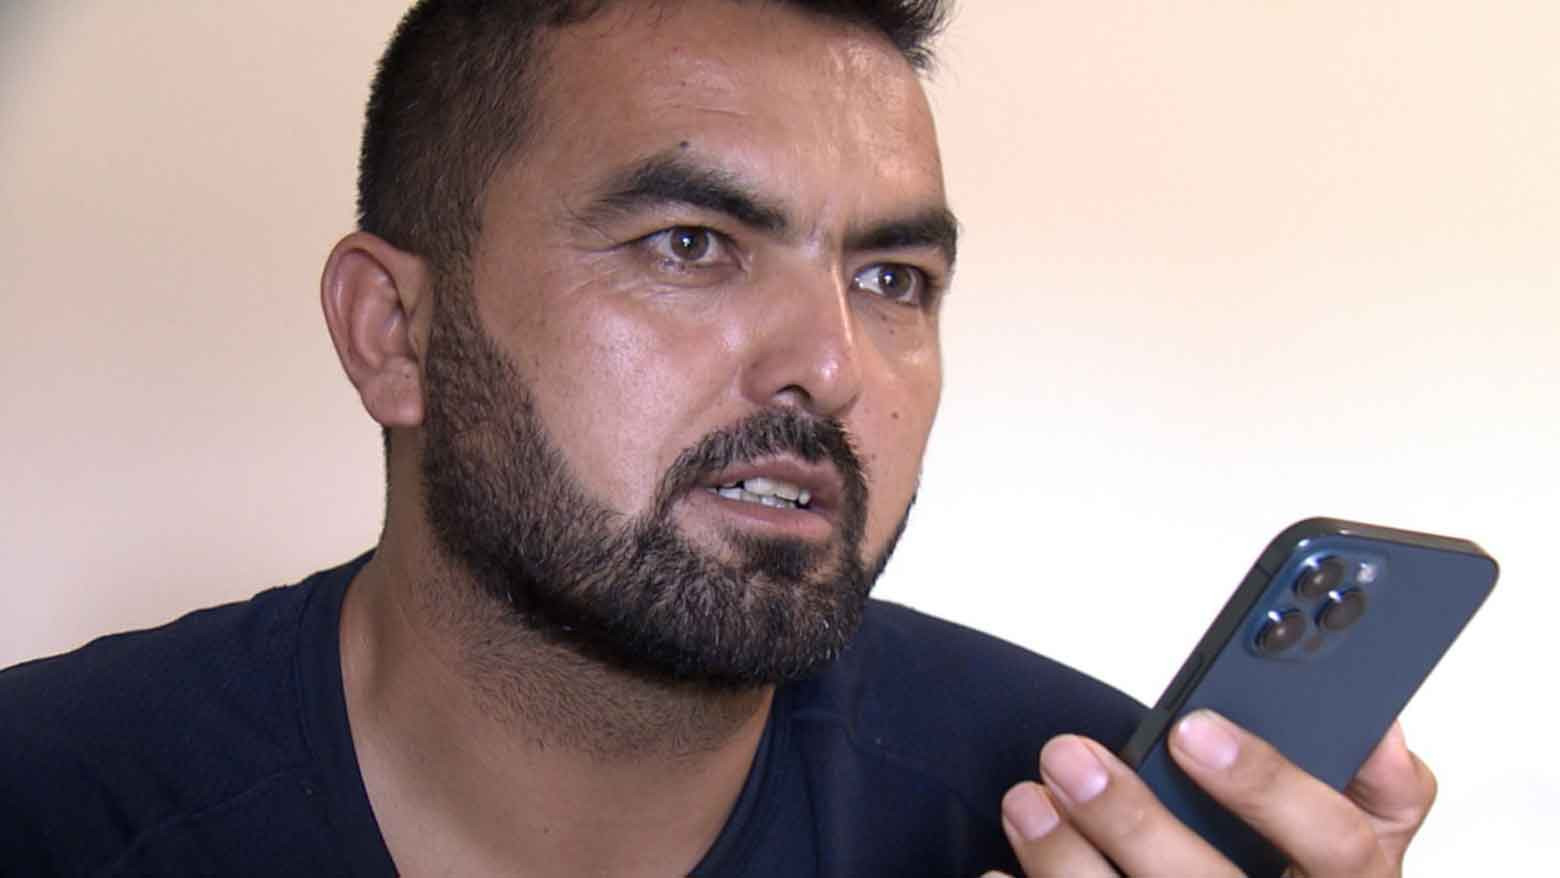 An Afghan refugee — and Taliban target — recounts his harrowing journey to America